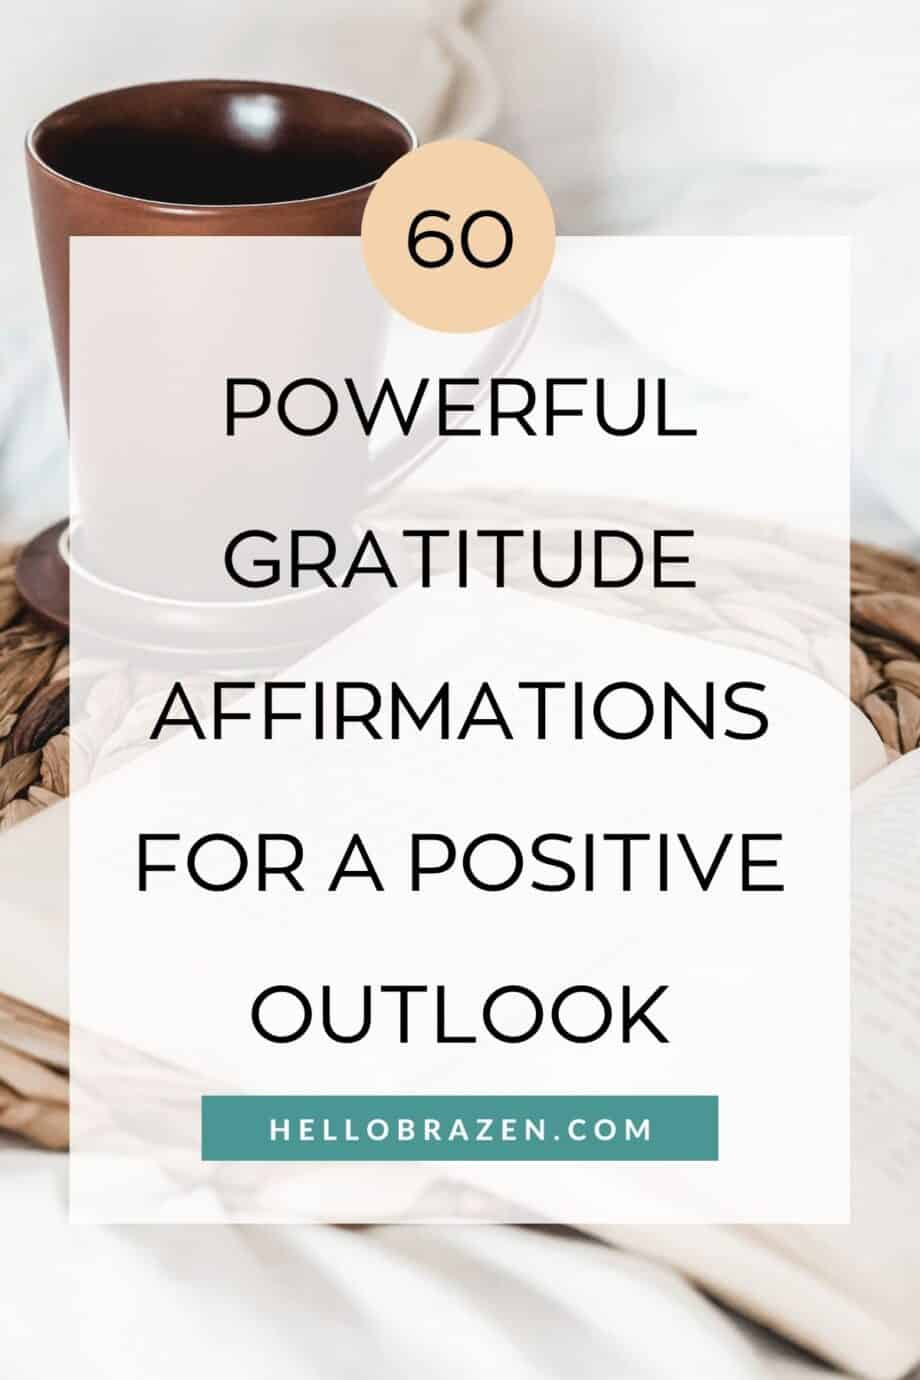 One way to include gratitude in your day is by saying positive affirmations. These are brief, simple statements that declare something about yourself or your situation in a positive light. Here are 60 powerful gratitude affirmations for a positive outlook.